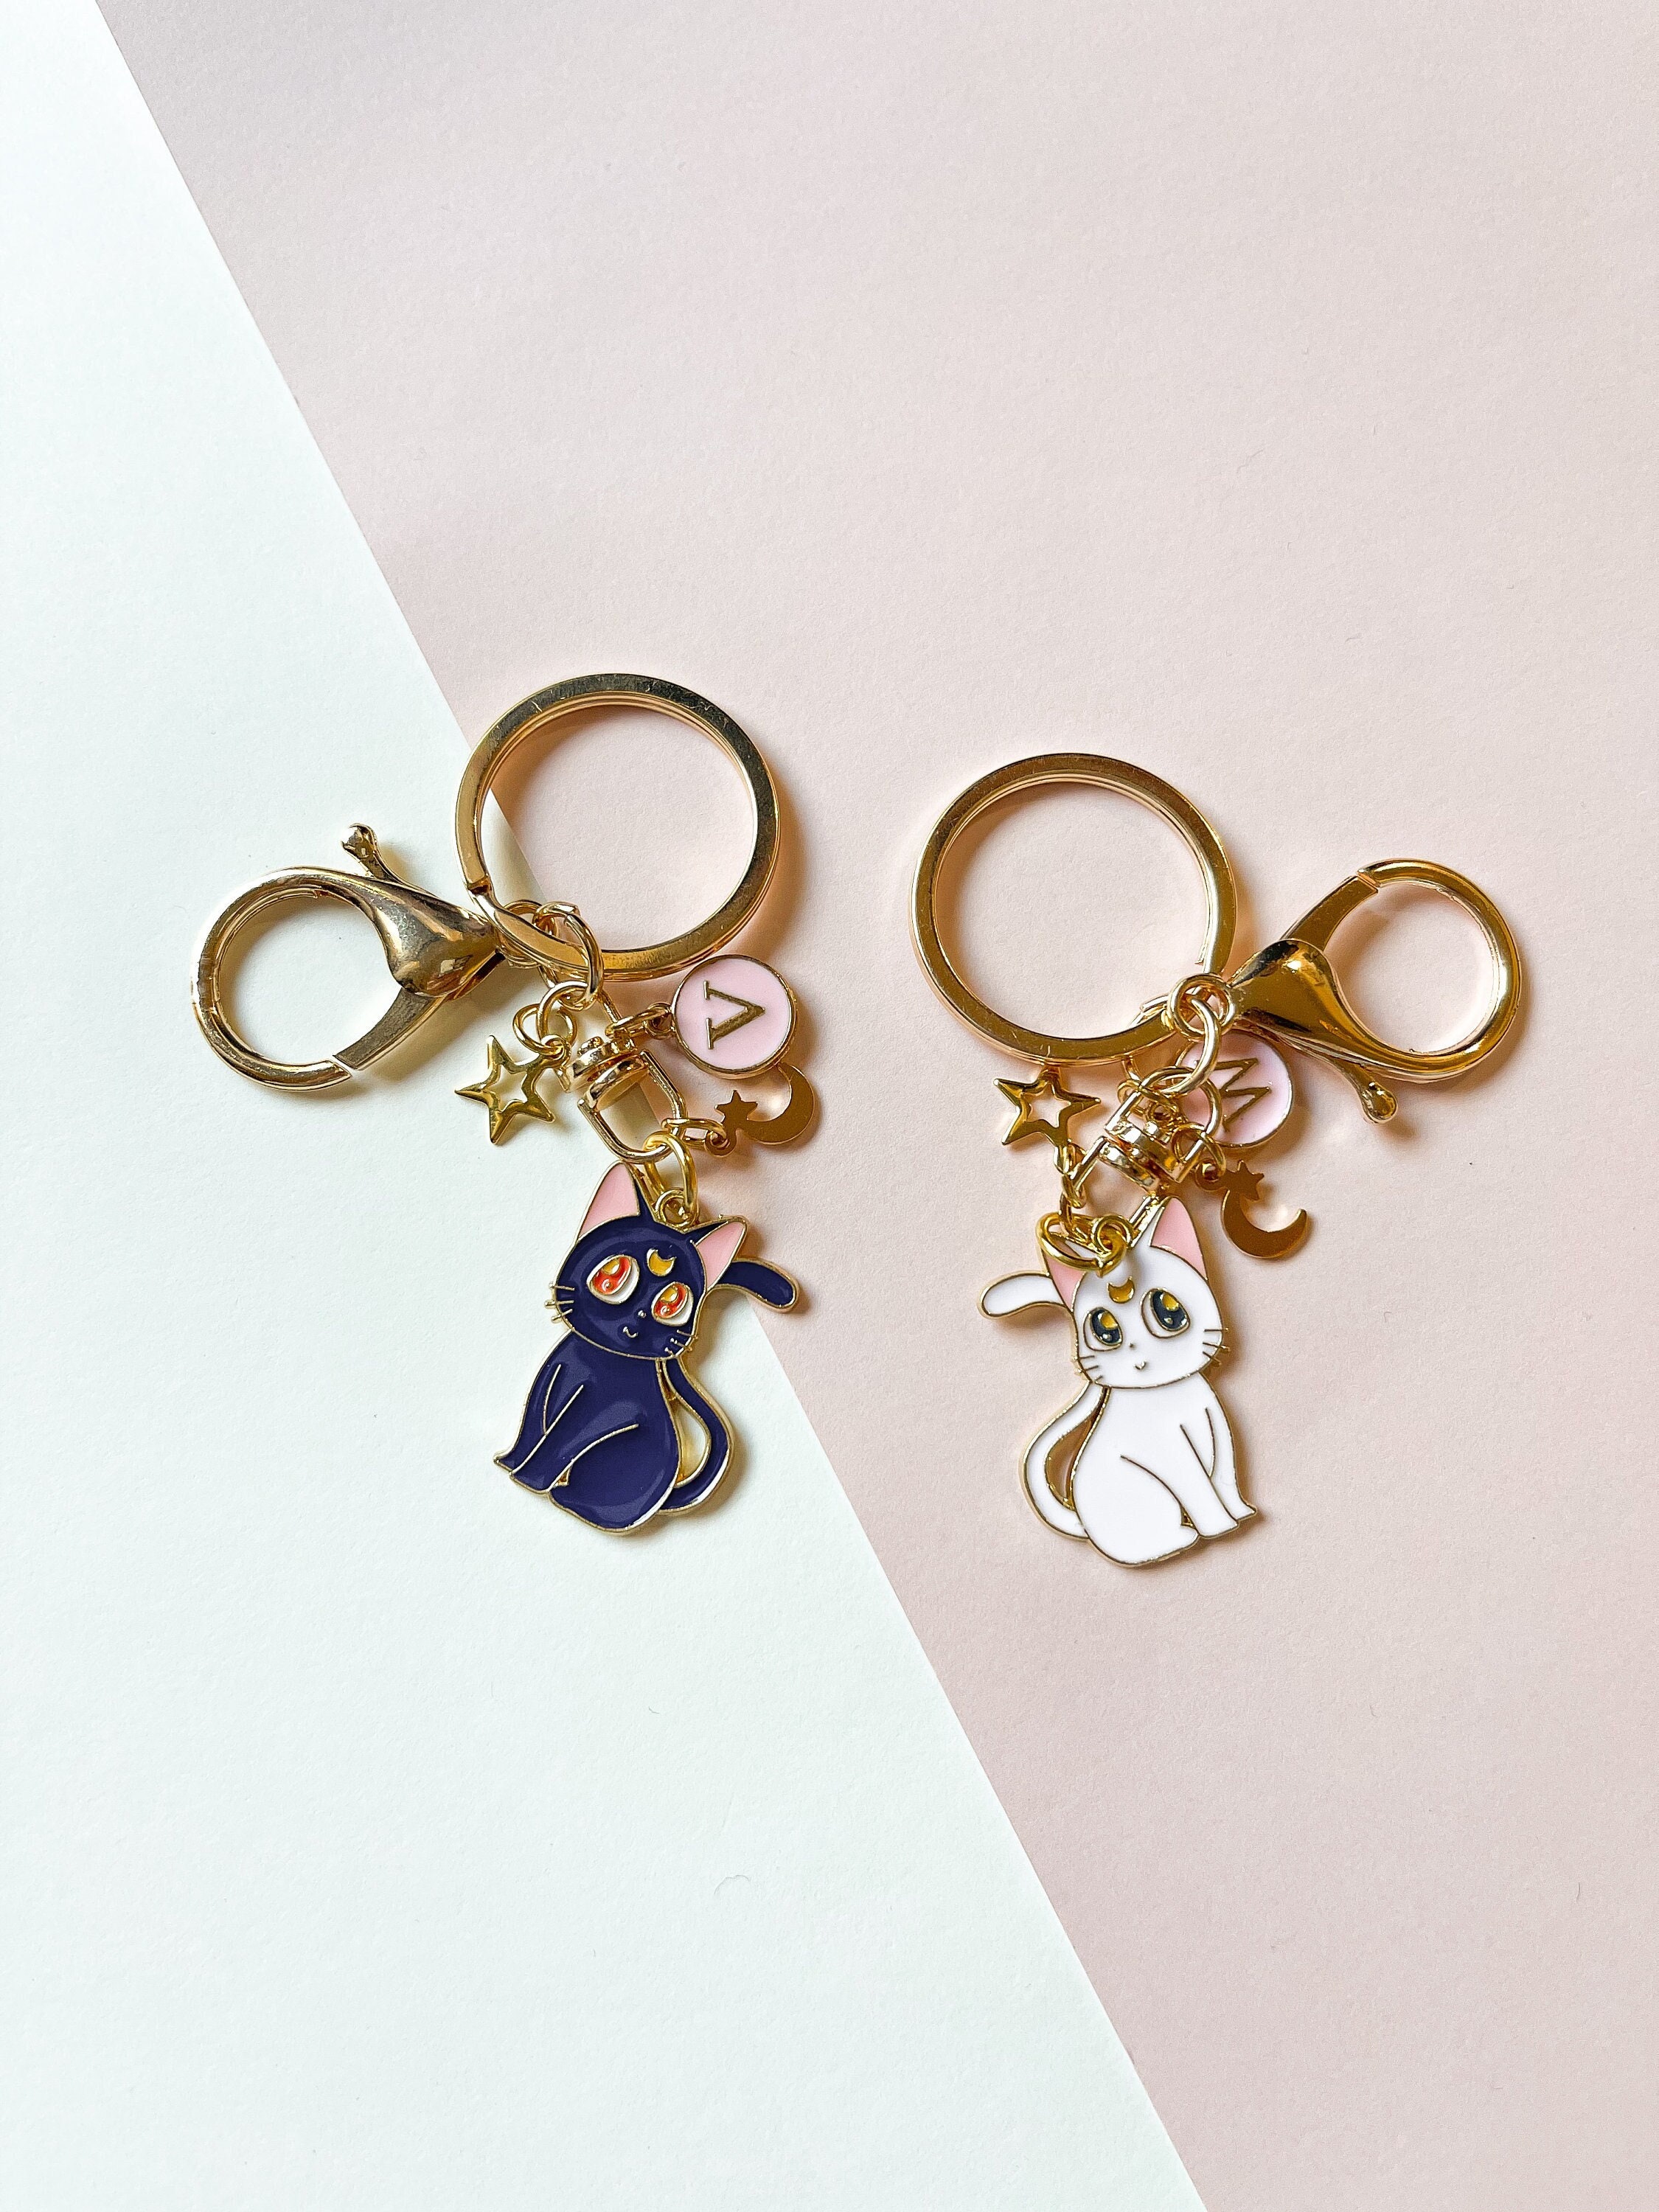 Cats And Noodles Key Fob Keychain | For Mew